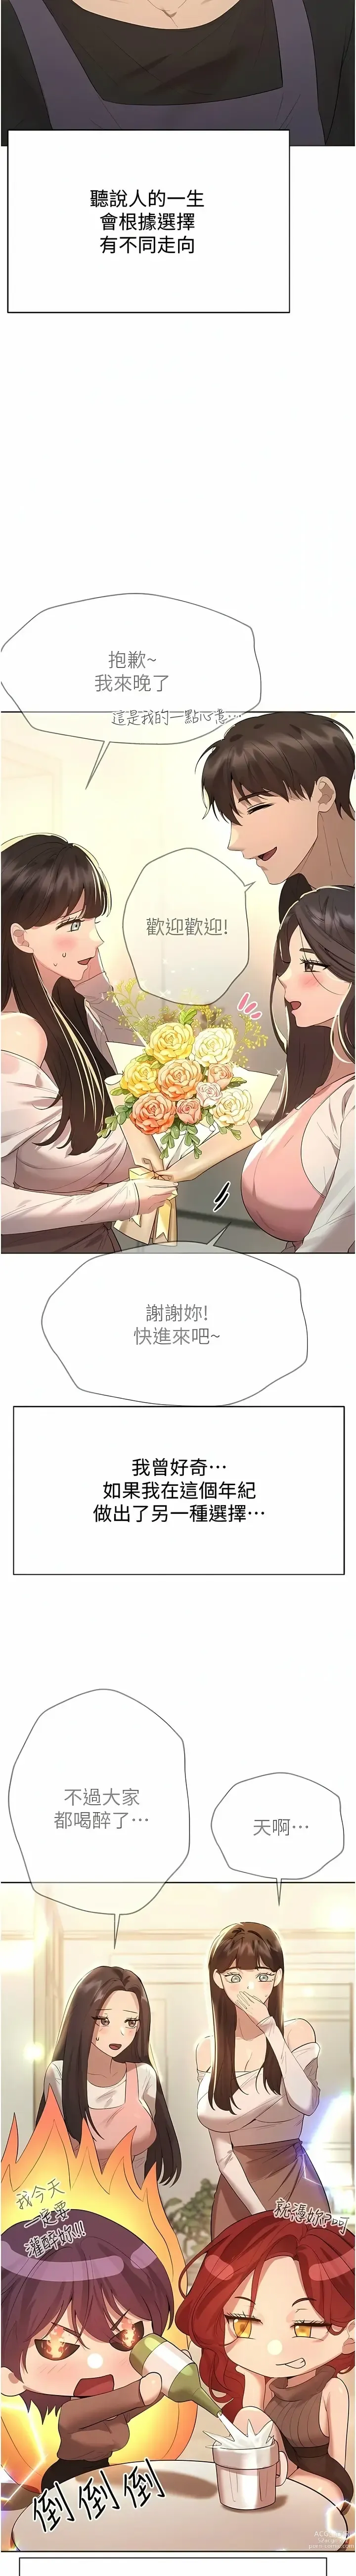 Page 1930 of manga 姐姐们的调教／My Sister’s Friends